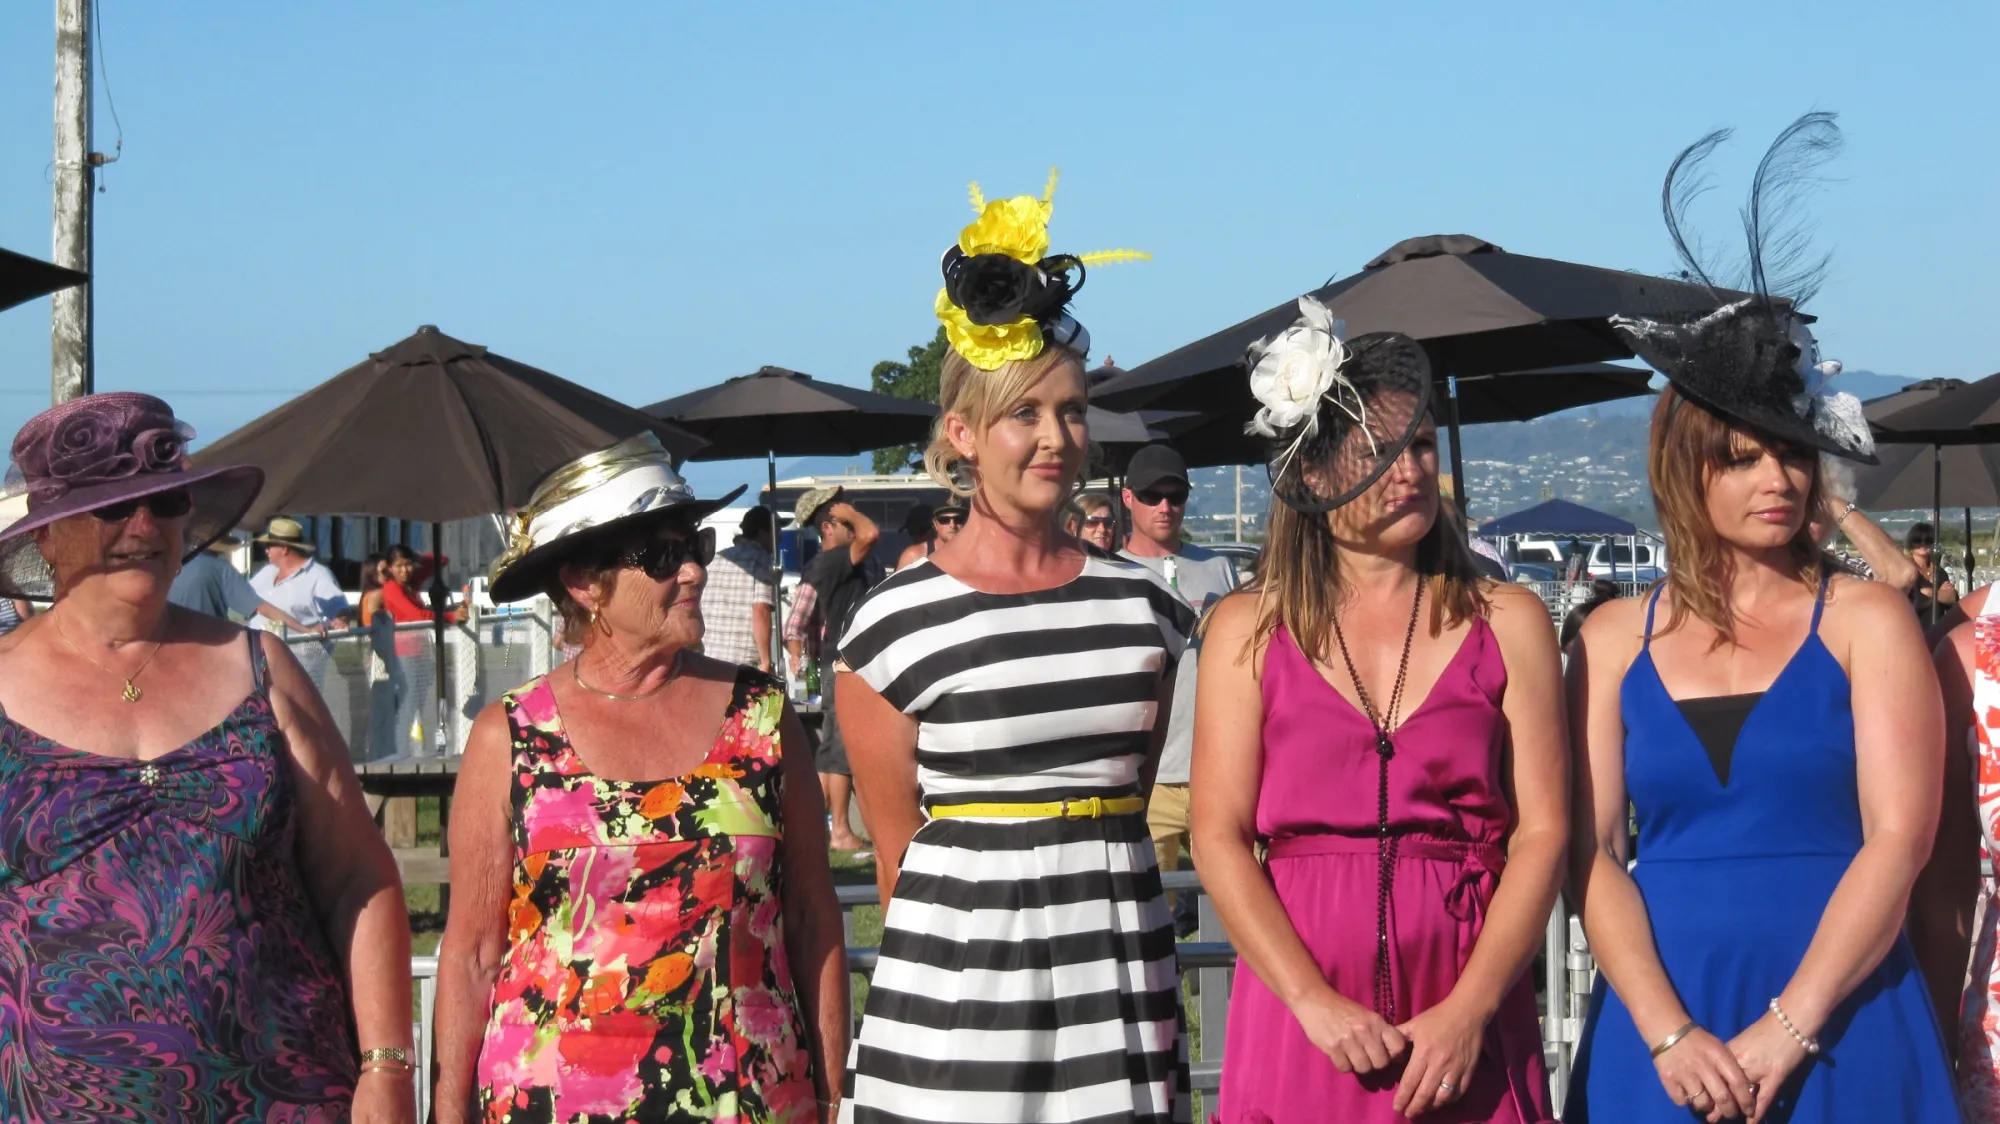 Nelson Harness Races Best Hat Competition 2015 - contestants